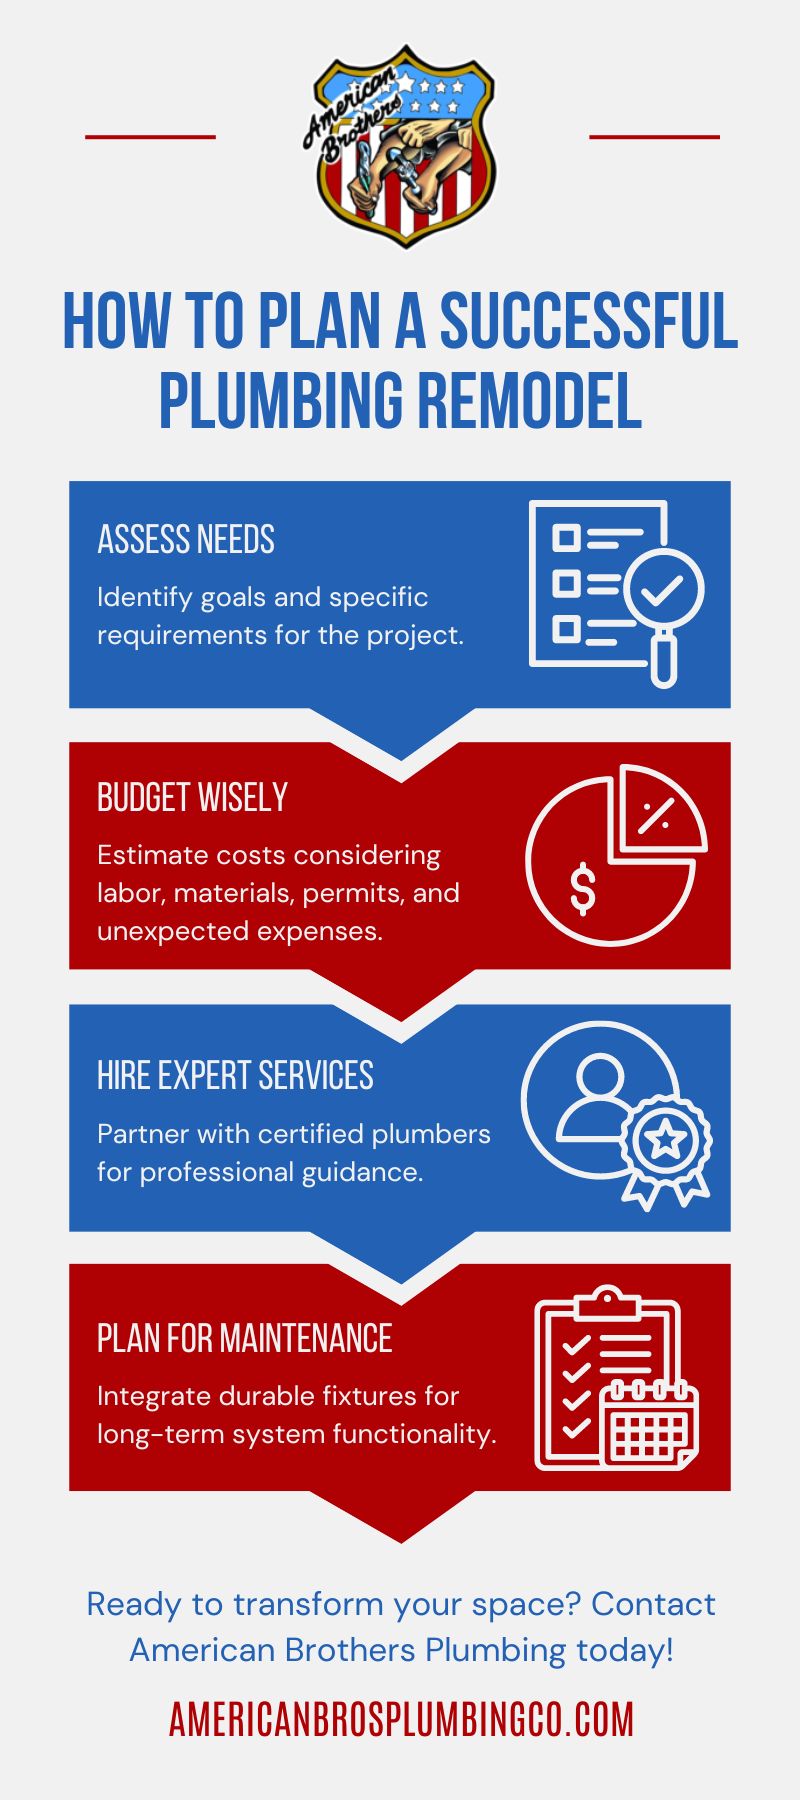 How to Plan a Successful Plumbing Remodel infographic